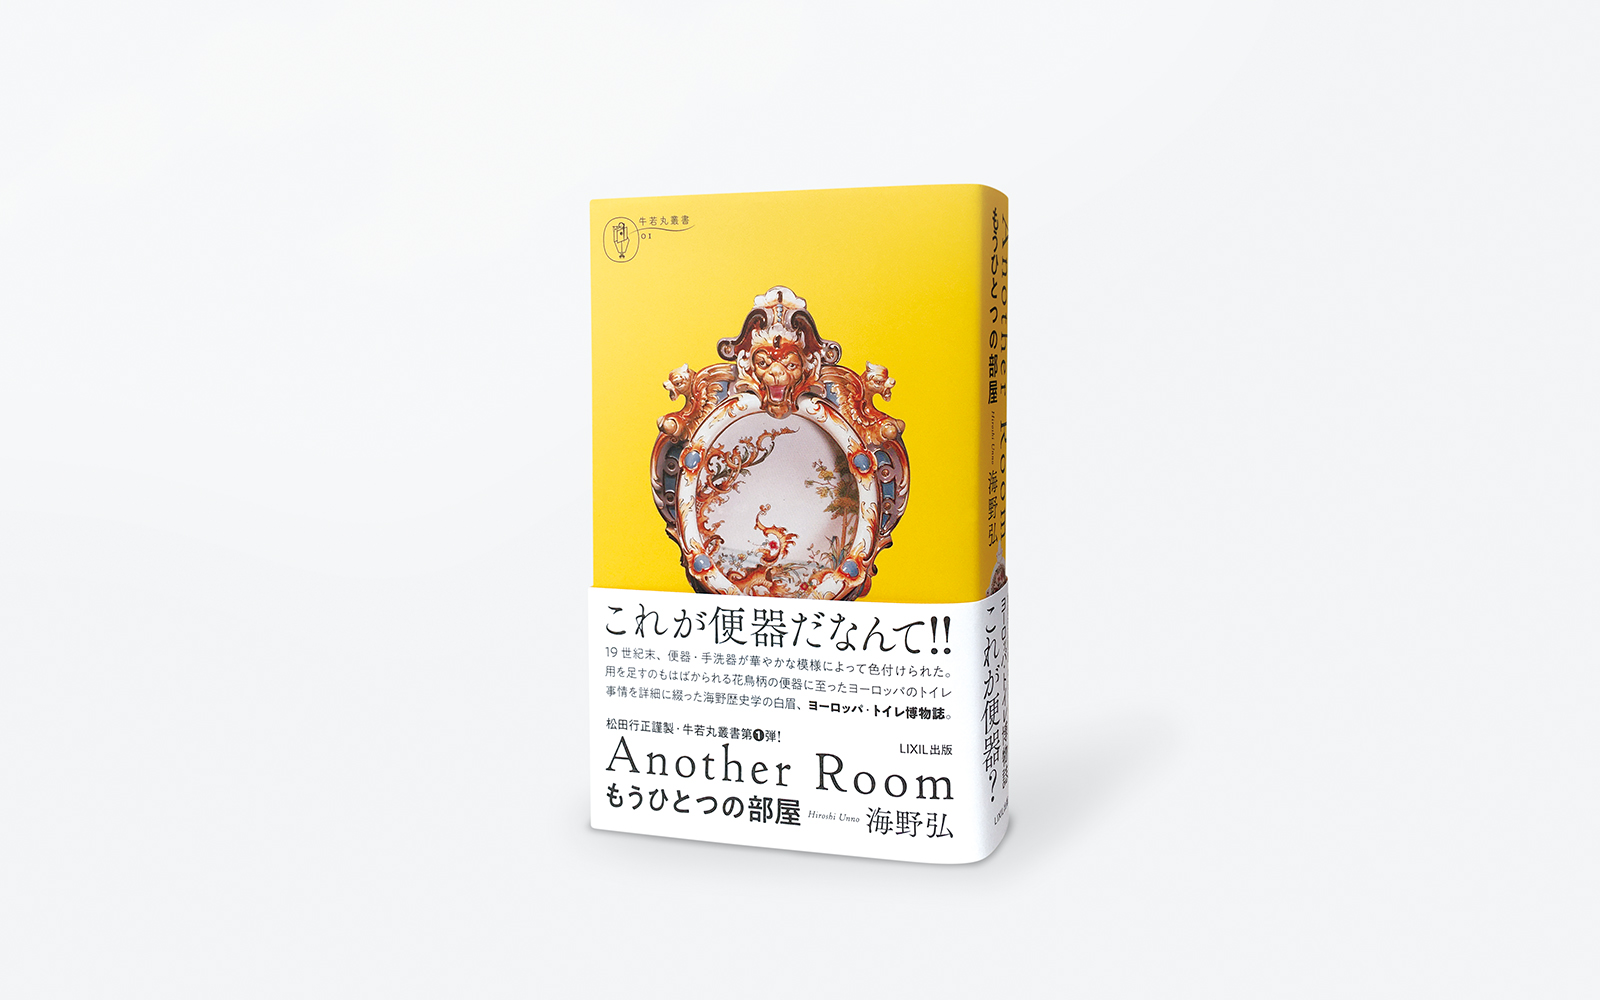 Another Room